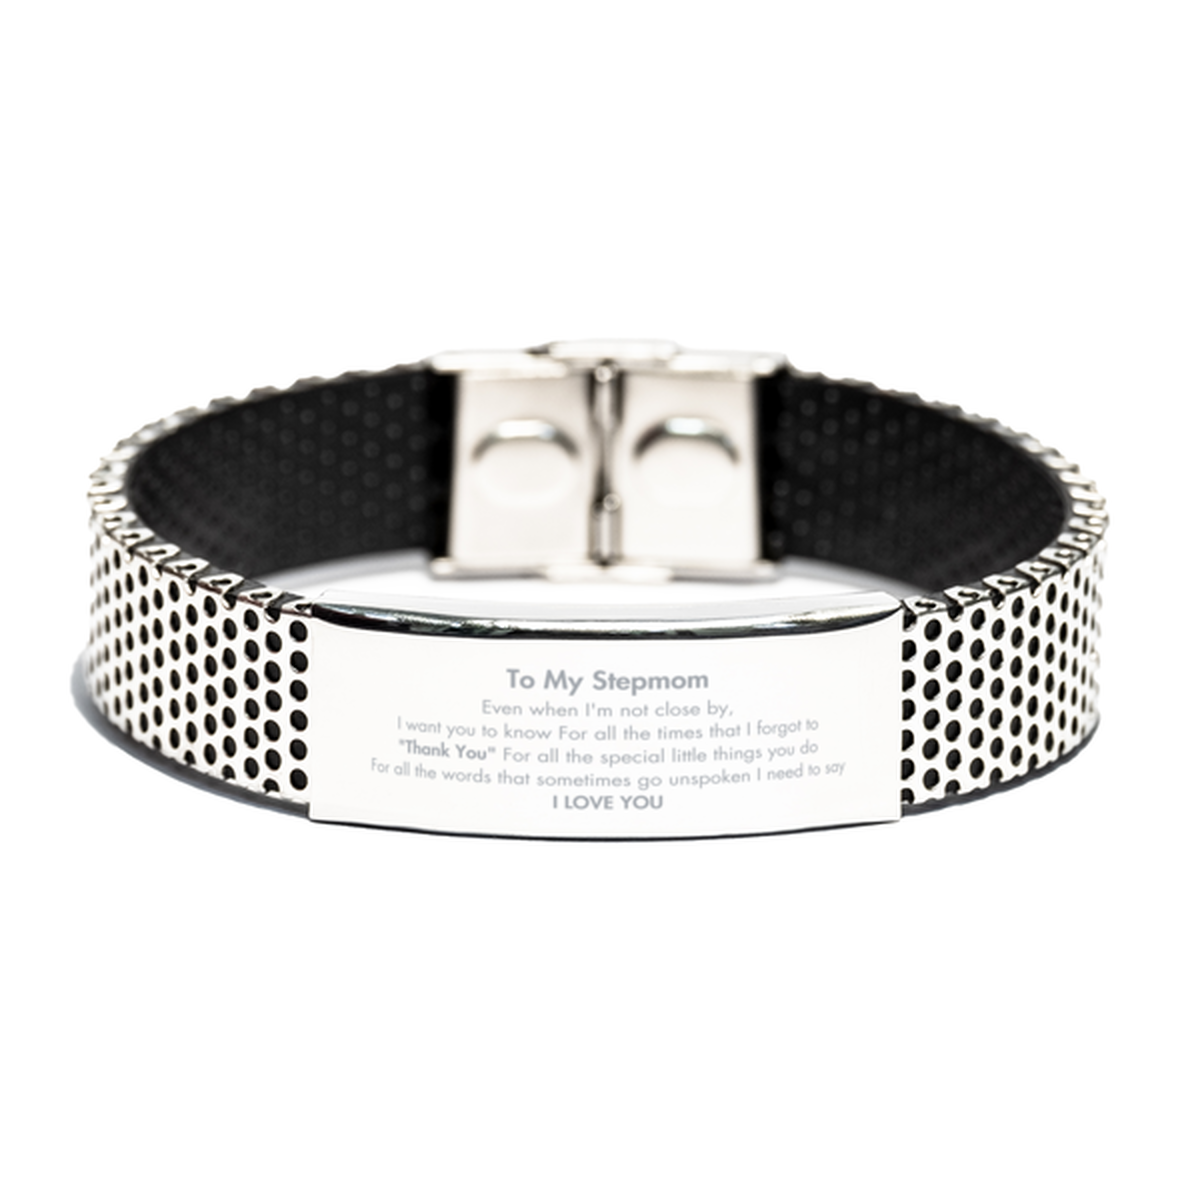 Thank You Gifts for Stepmom, Keepsake Stainless Steel Bracelet Gifts for Stepmom Birthday Mother's day Father's Day Stepmom For all the words That sometimes go unspoken I need to say I LOVE YOU